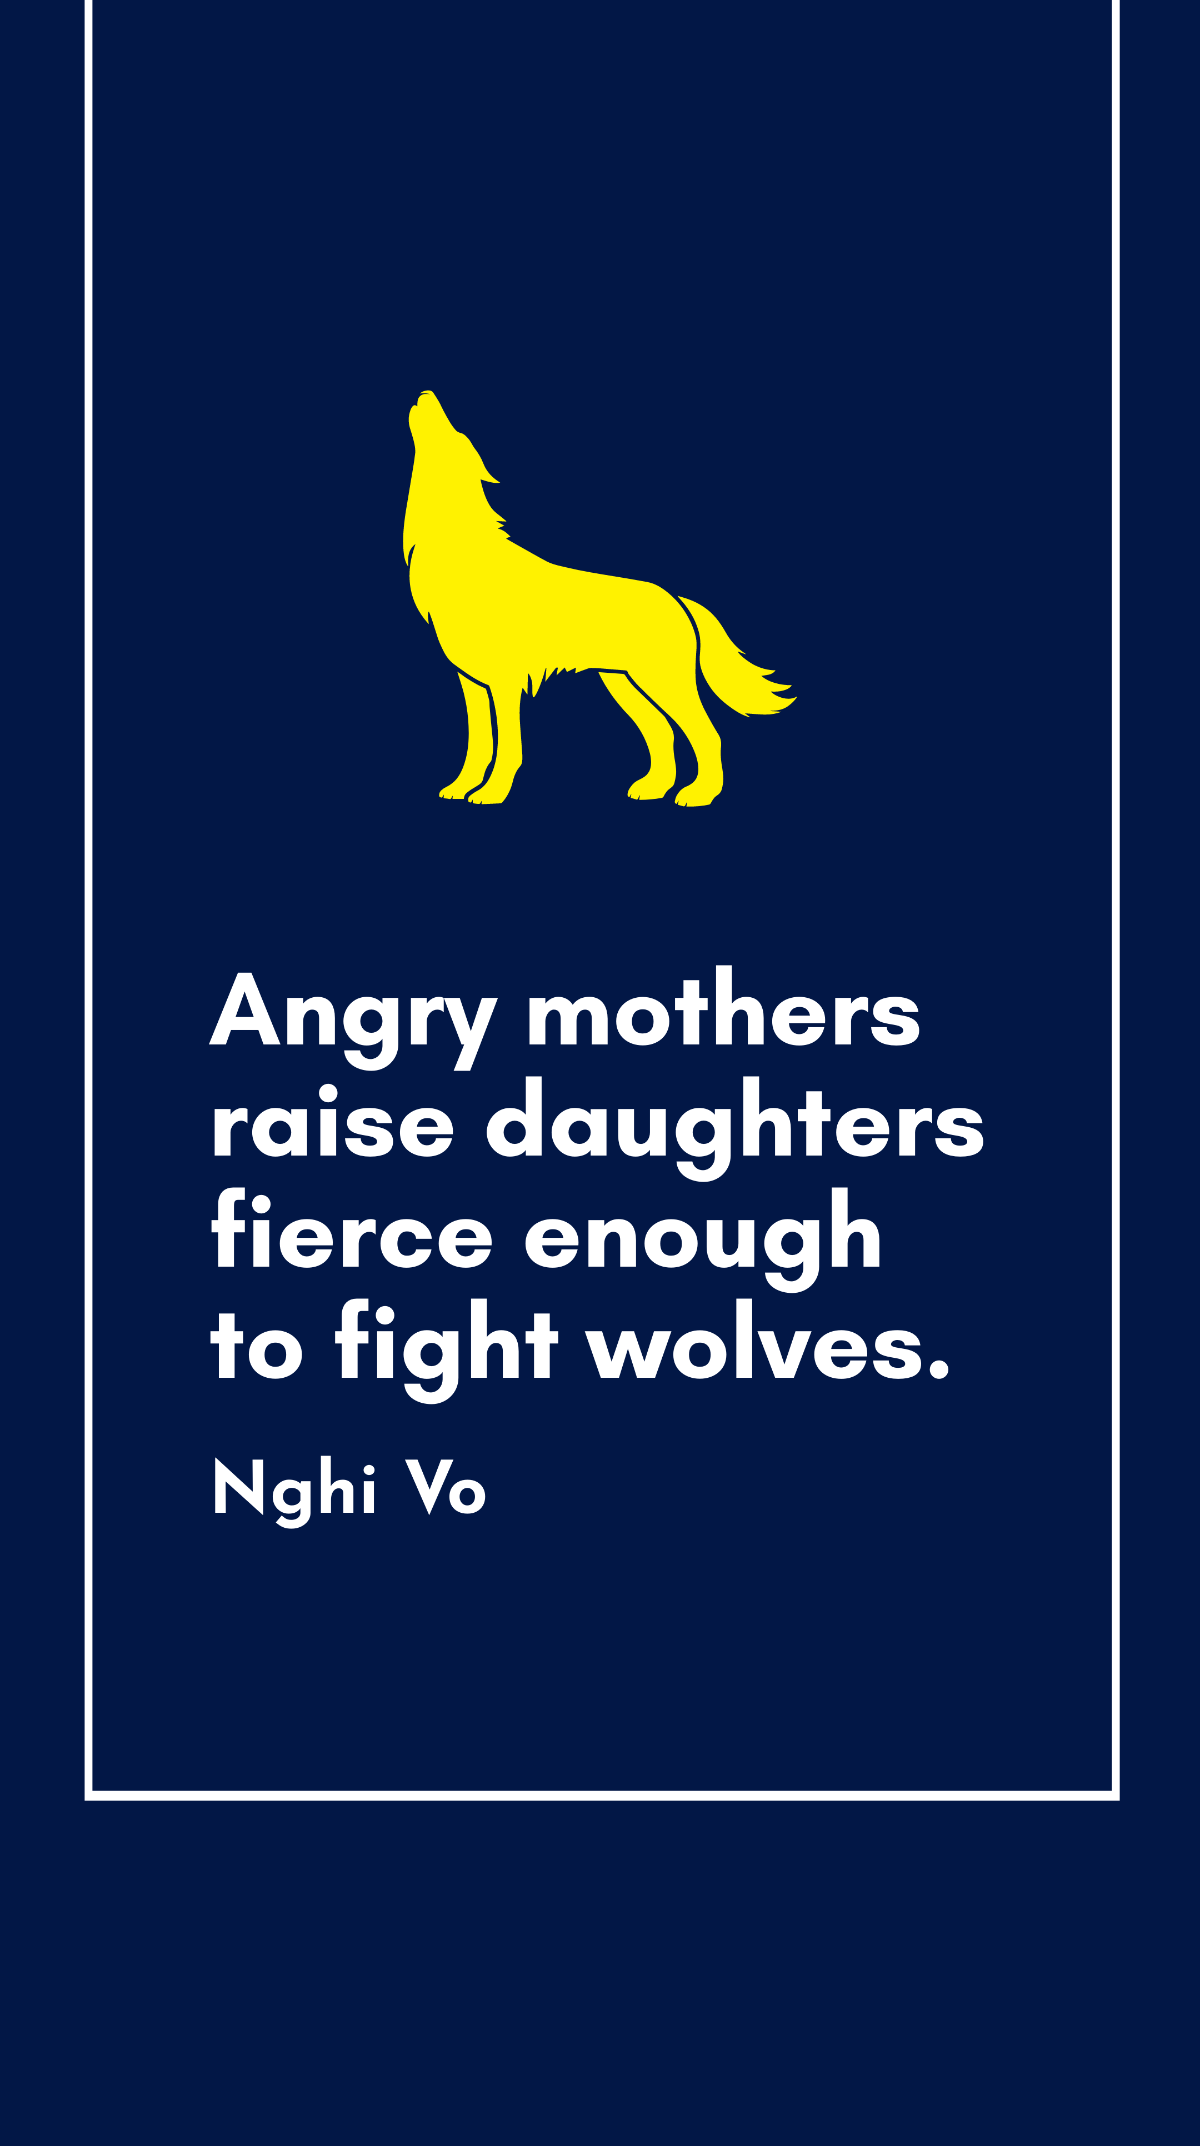 Nghi Vo - Angry mothers raise daughters fierce enough to fight wolves.